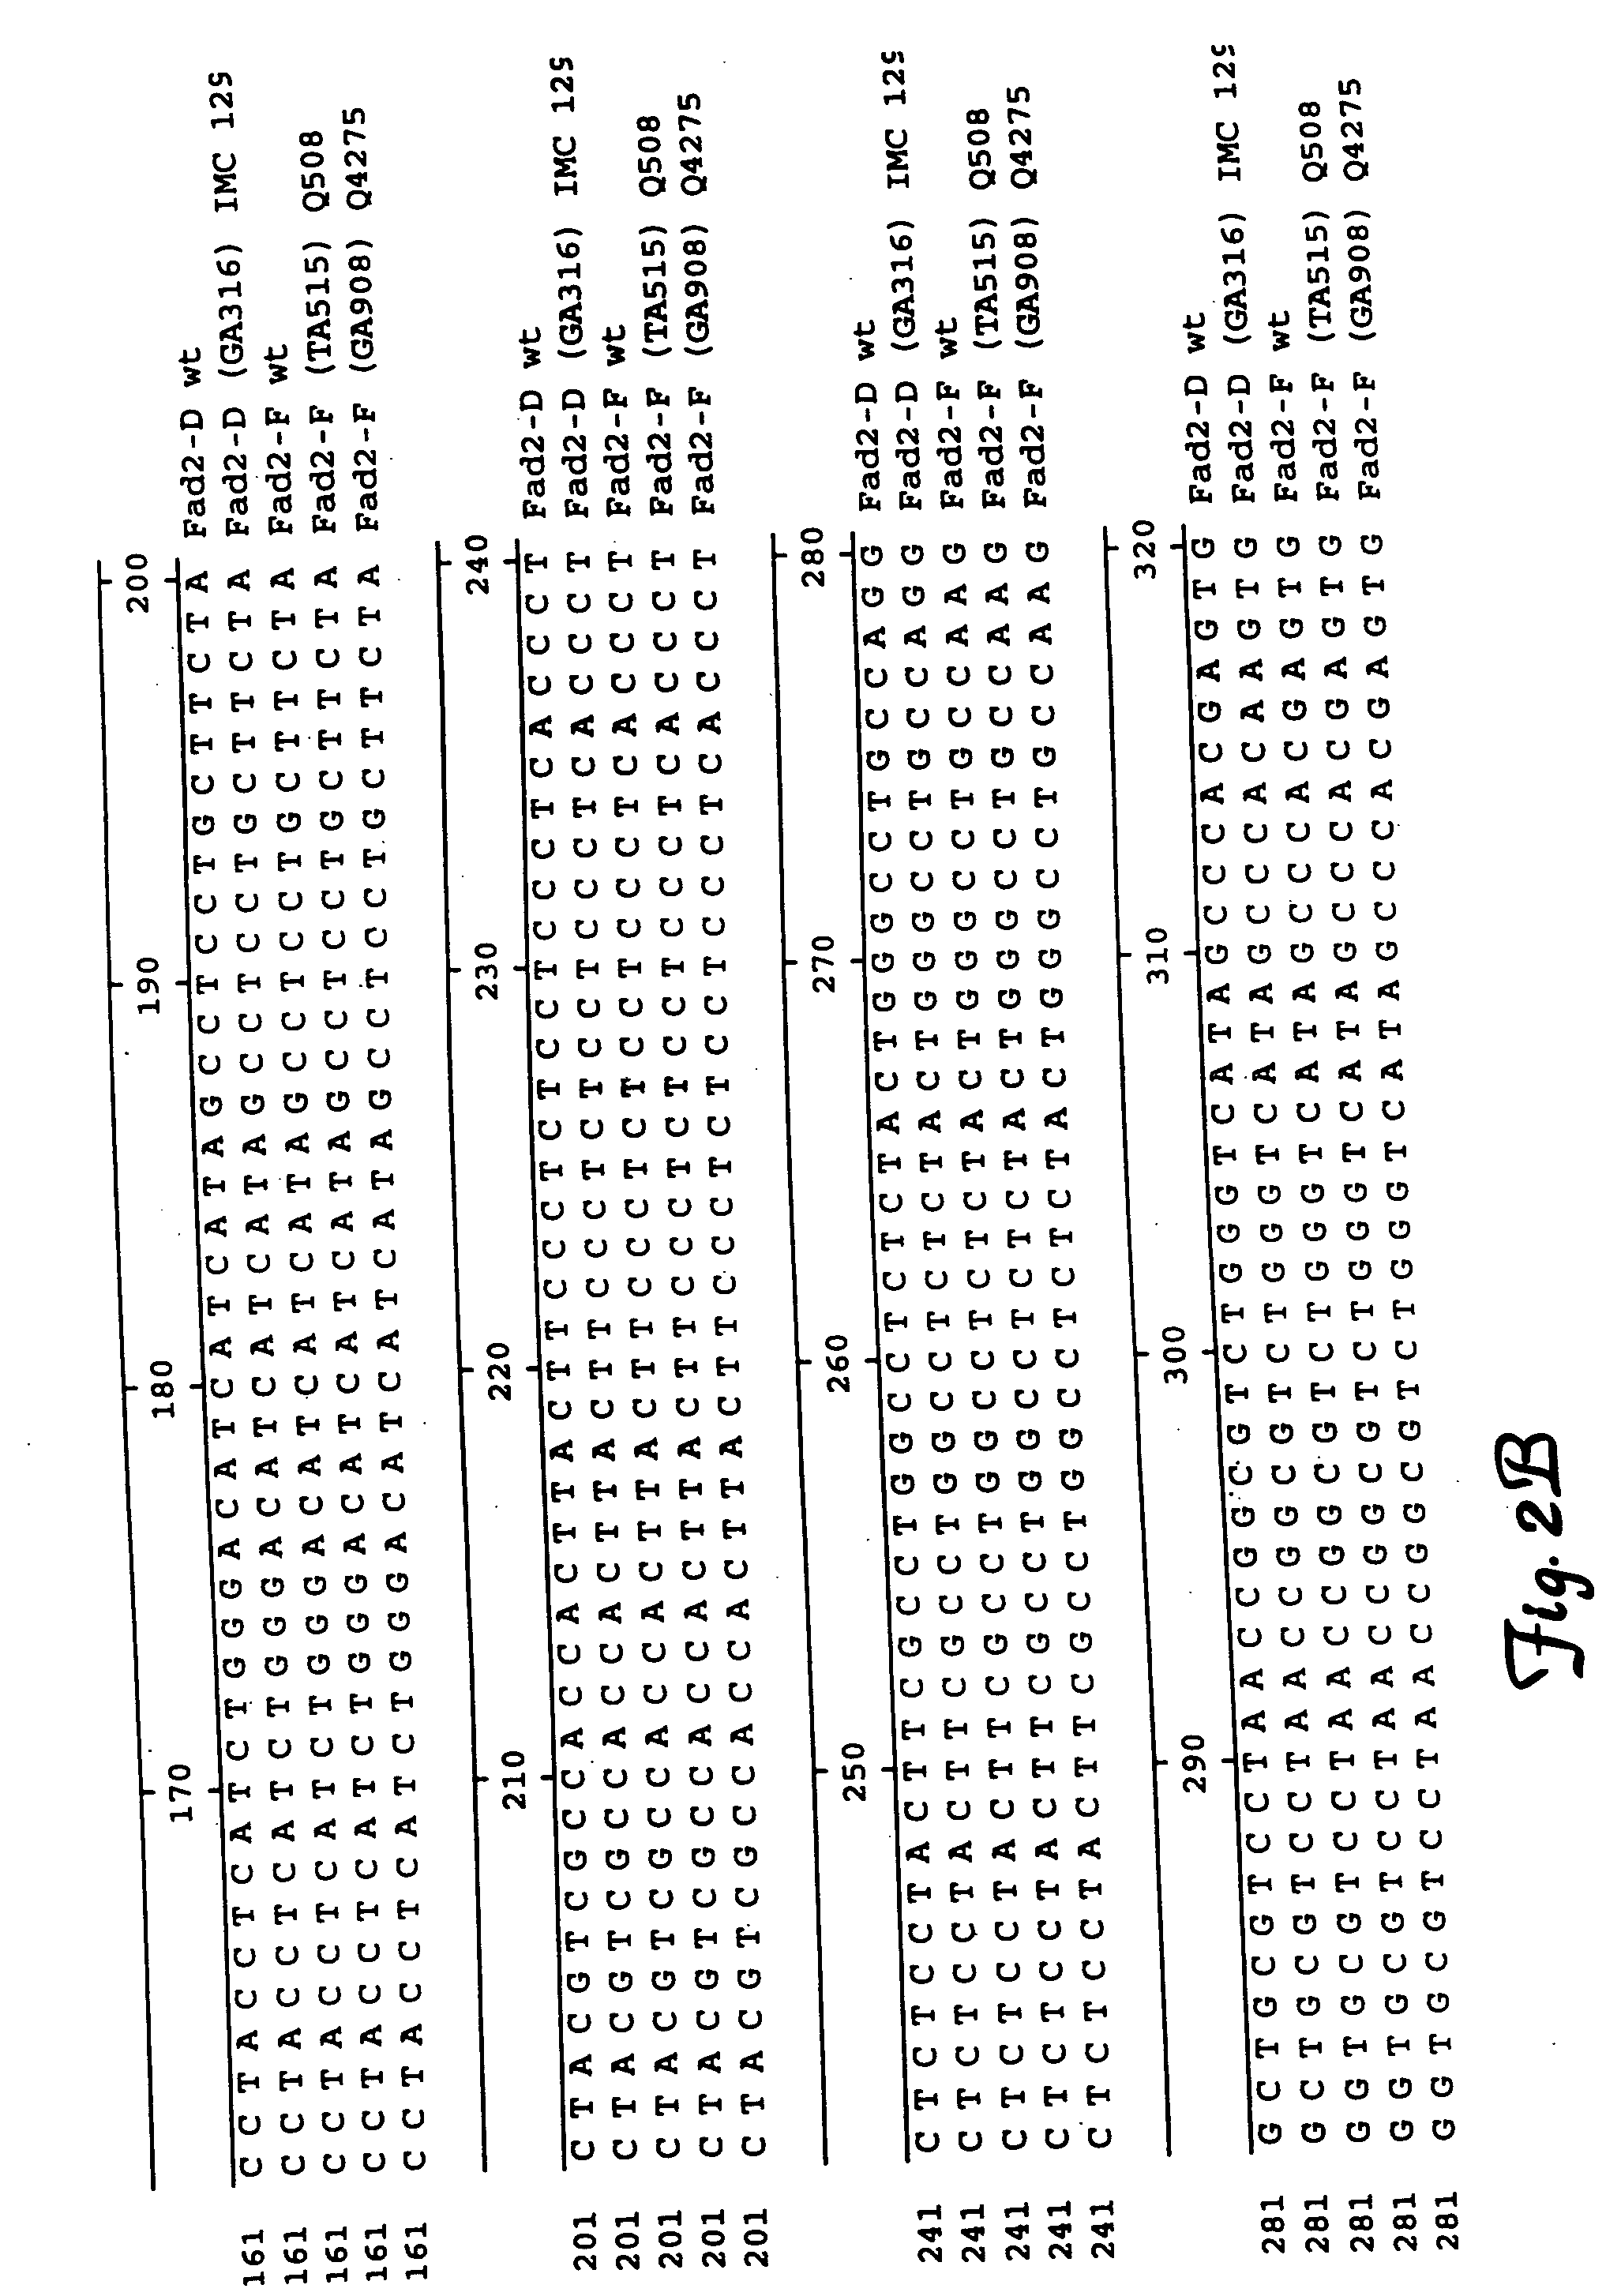 Fatty acid desaturases and mutant sequences thereof